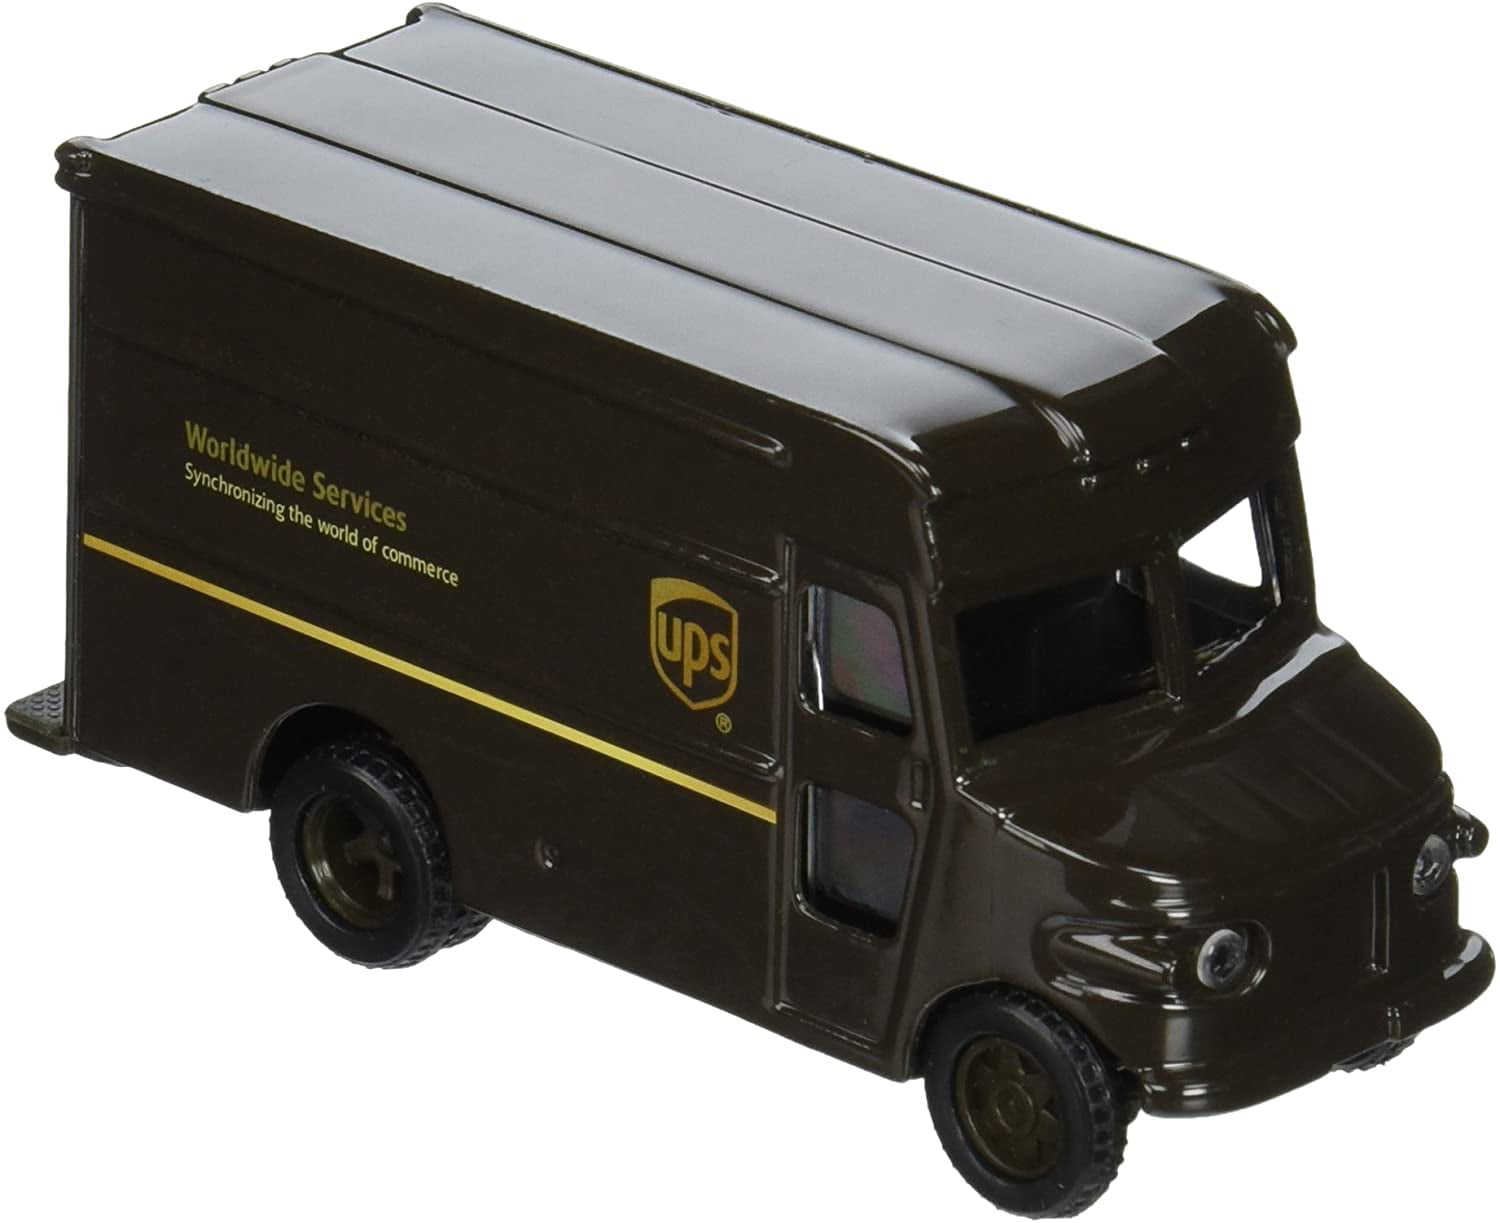 UPS United Parcel Service Diecast Die Cast P-600 Package Car Toy Truck 